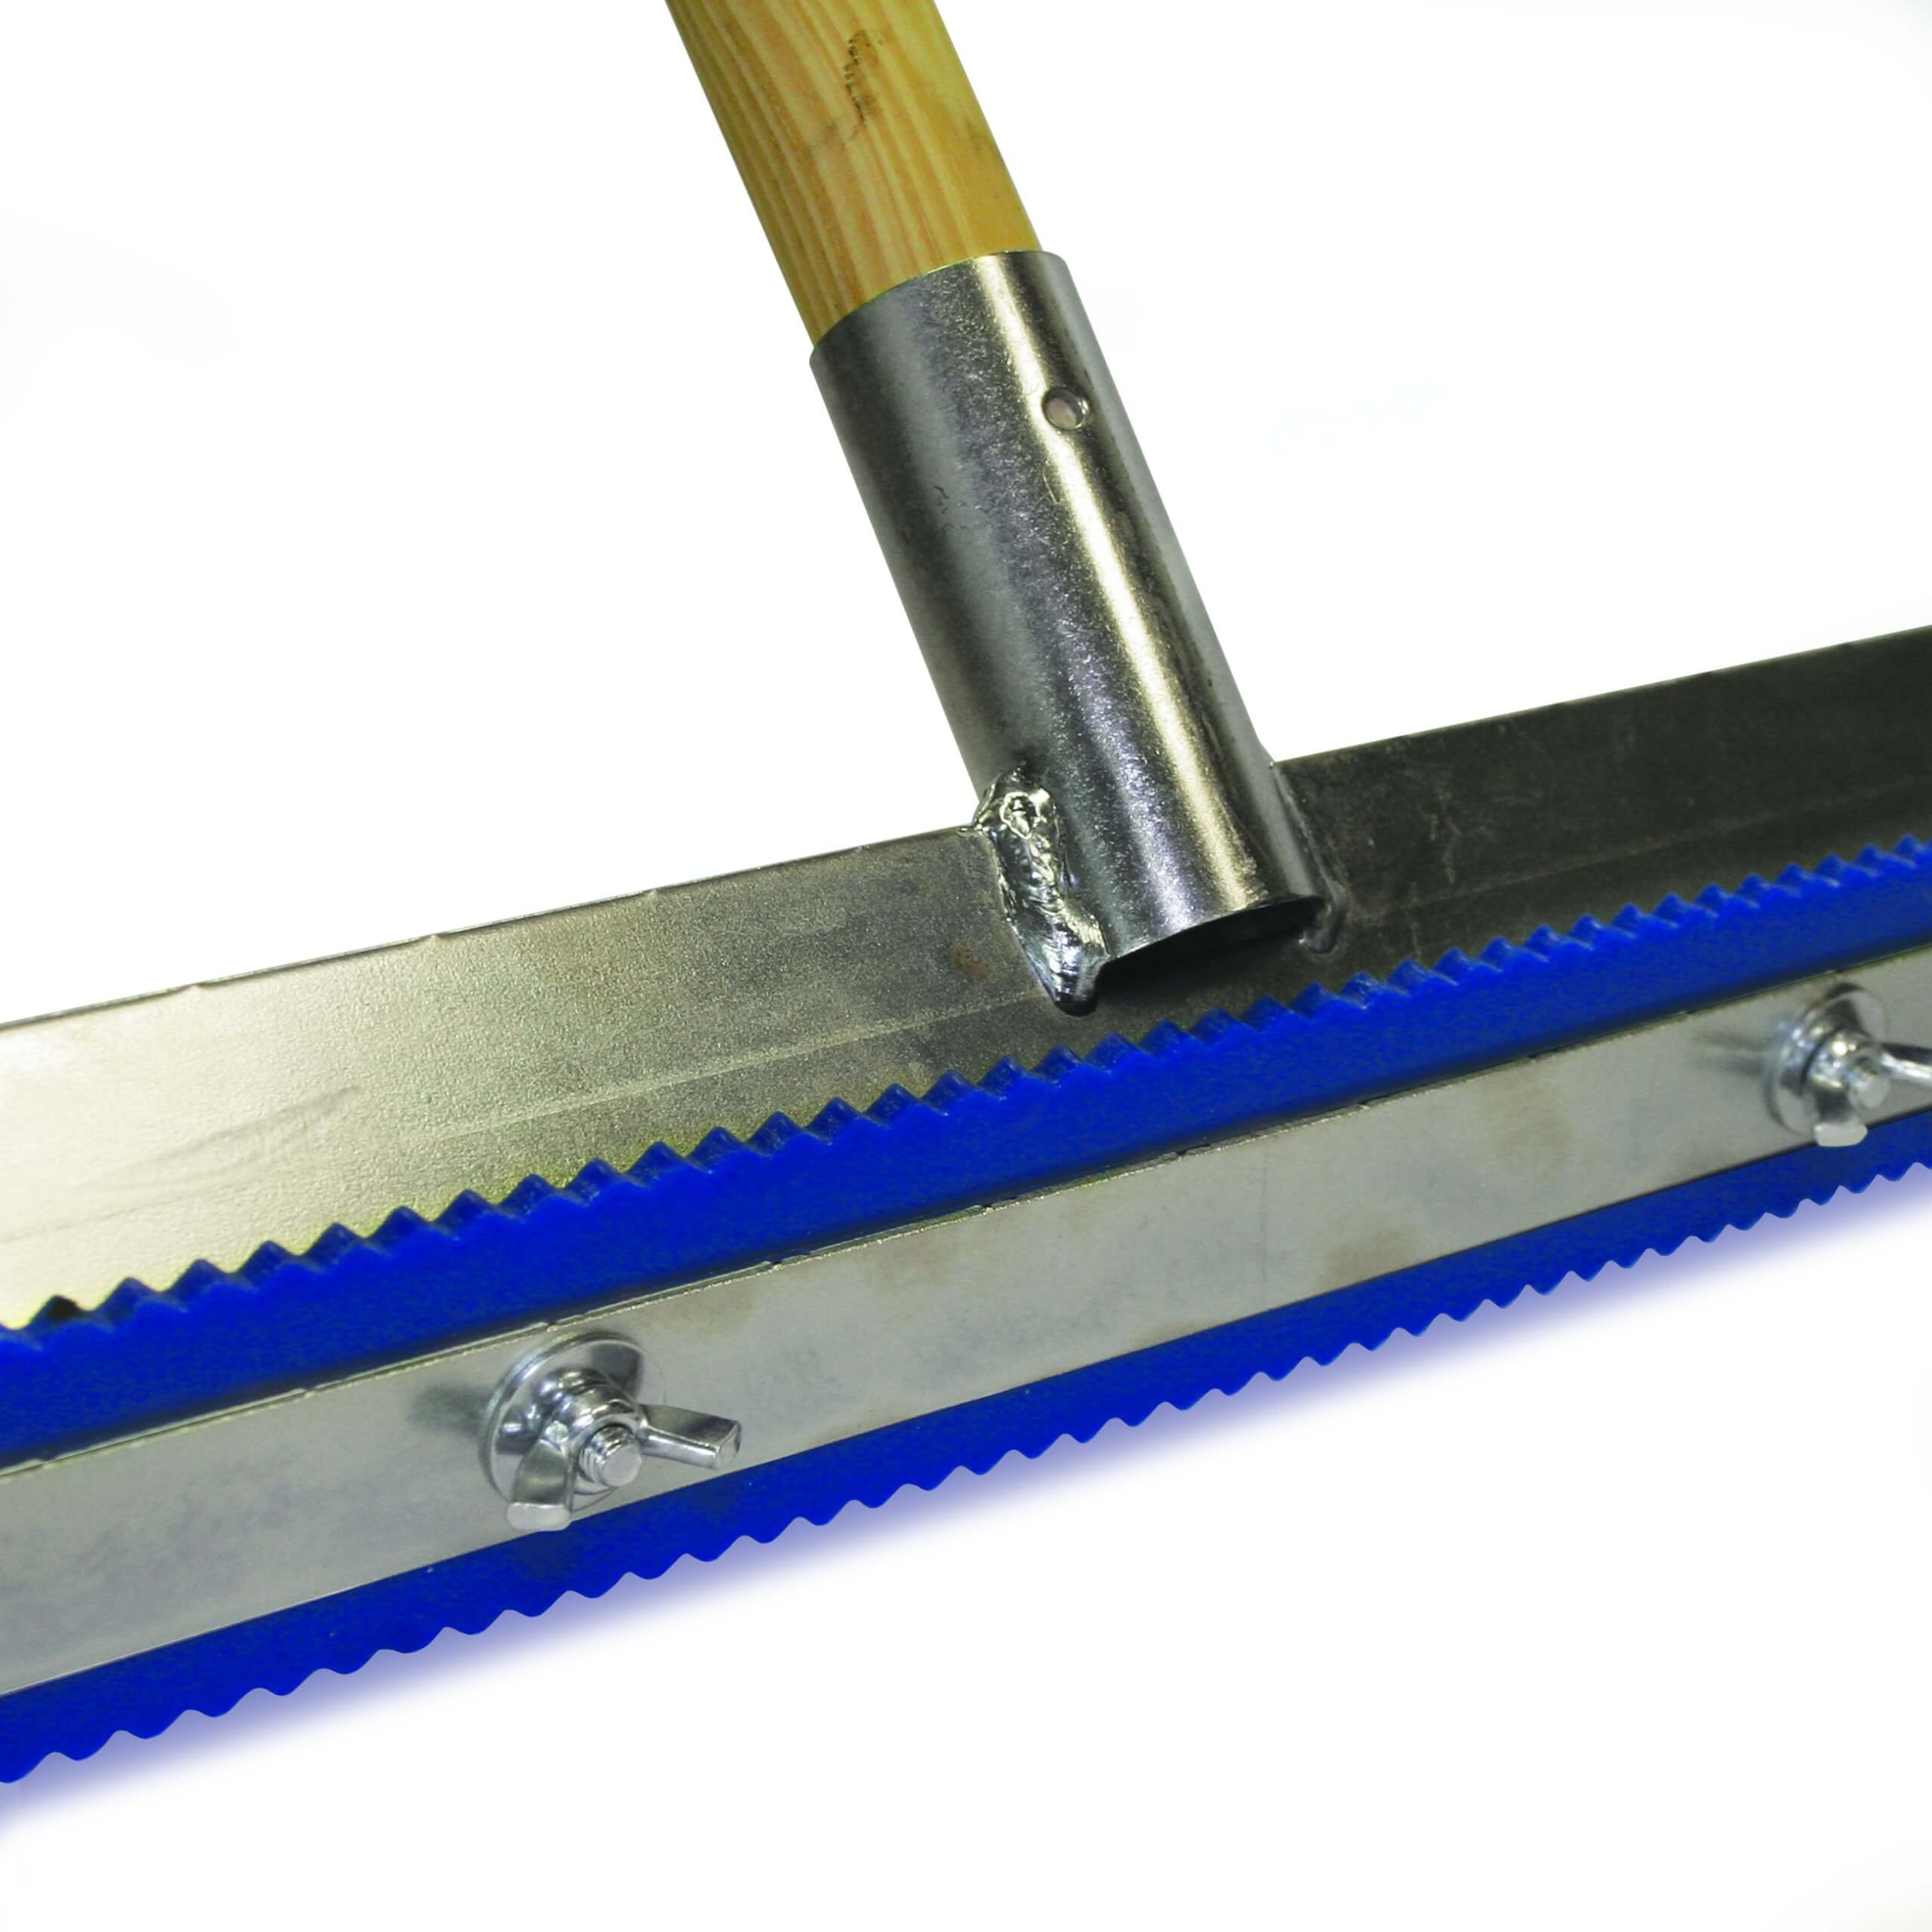 Serrated squeegee